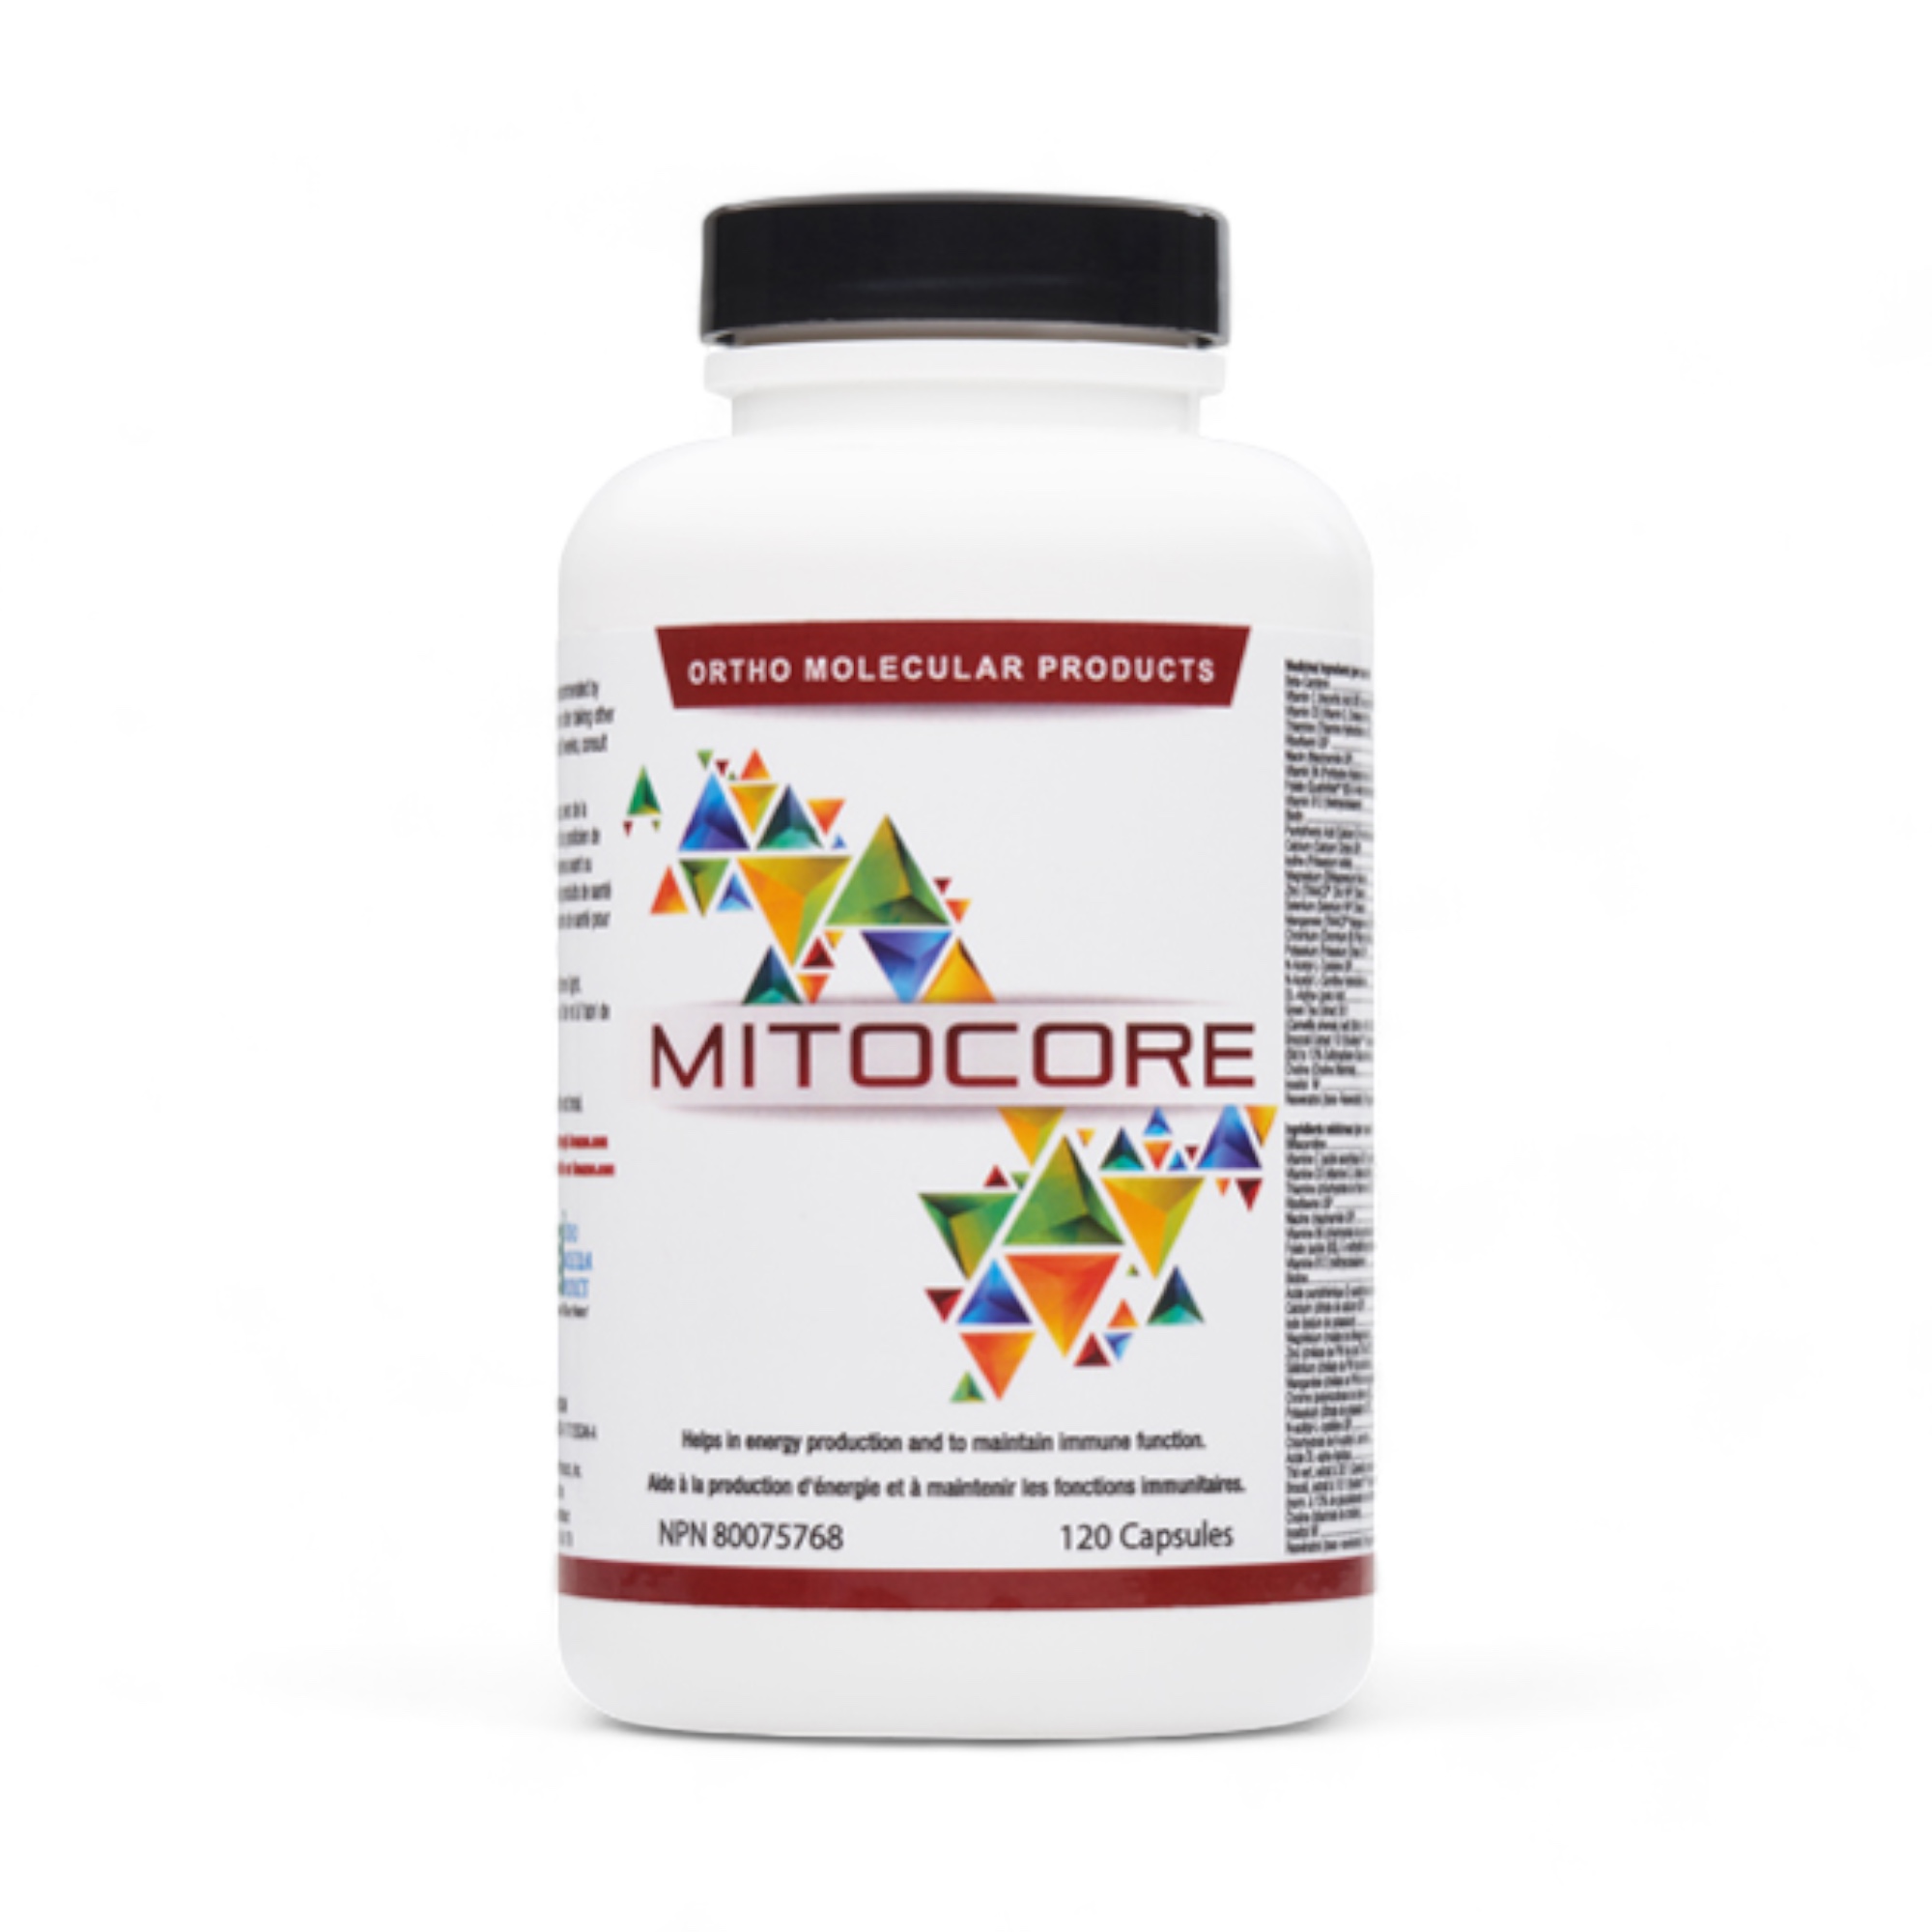 Mitocore 120 capsules Ortho Molecular Products